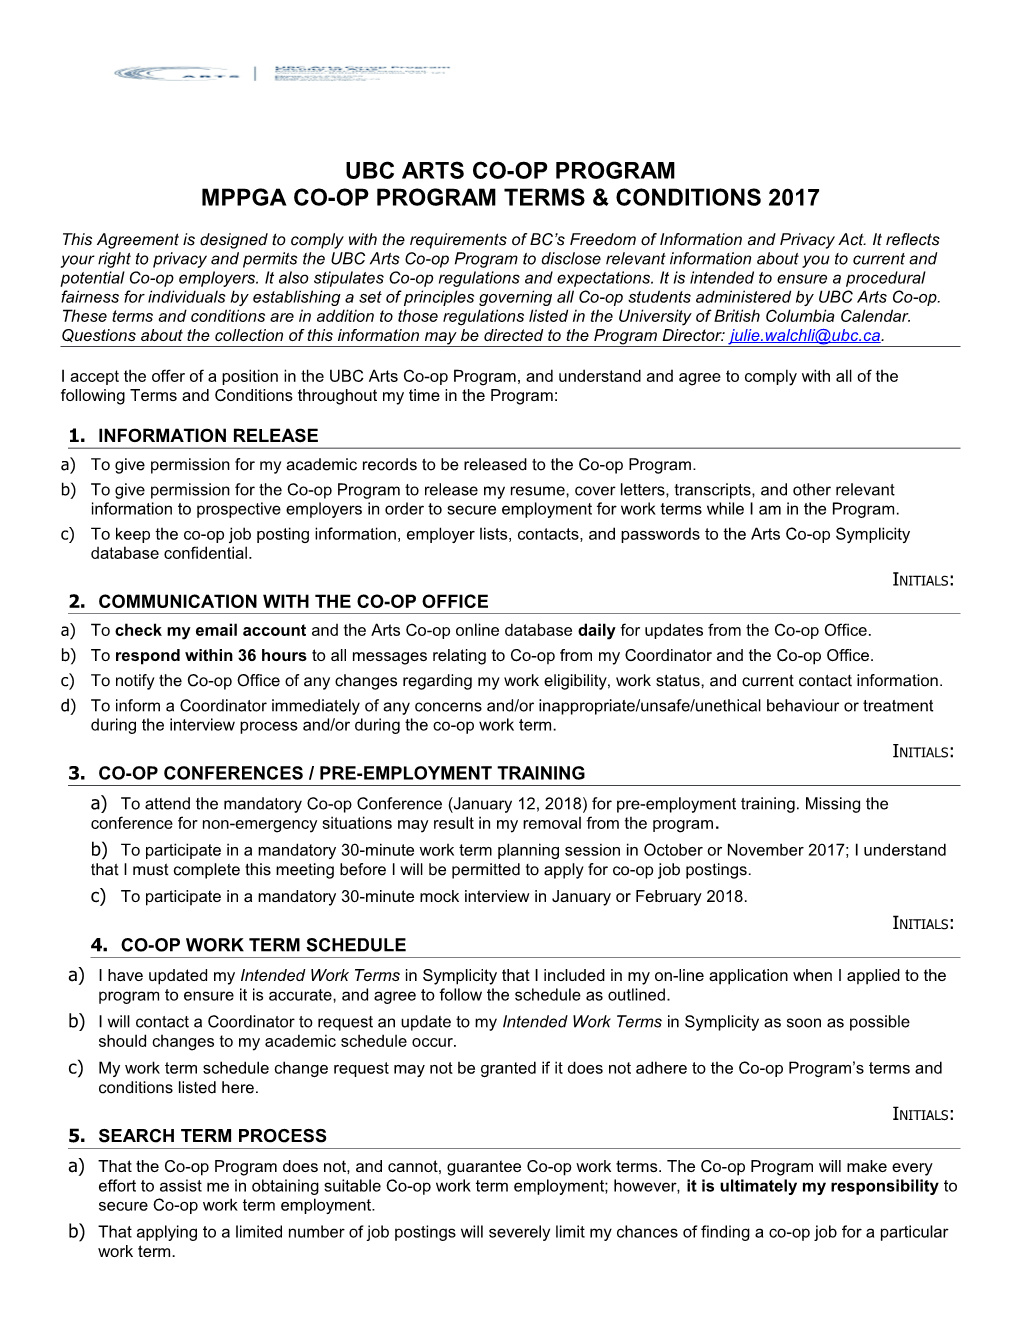 MPPGA Co-Op Program Terms & Conditions 2017